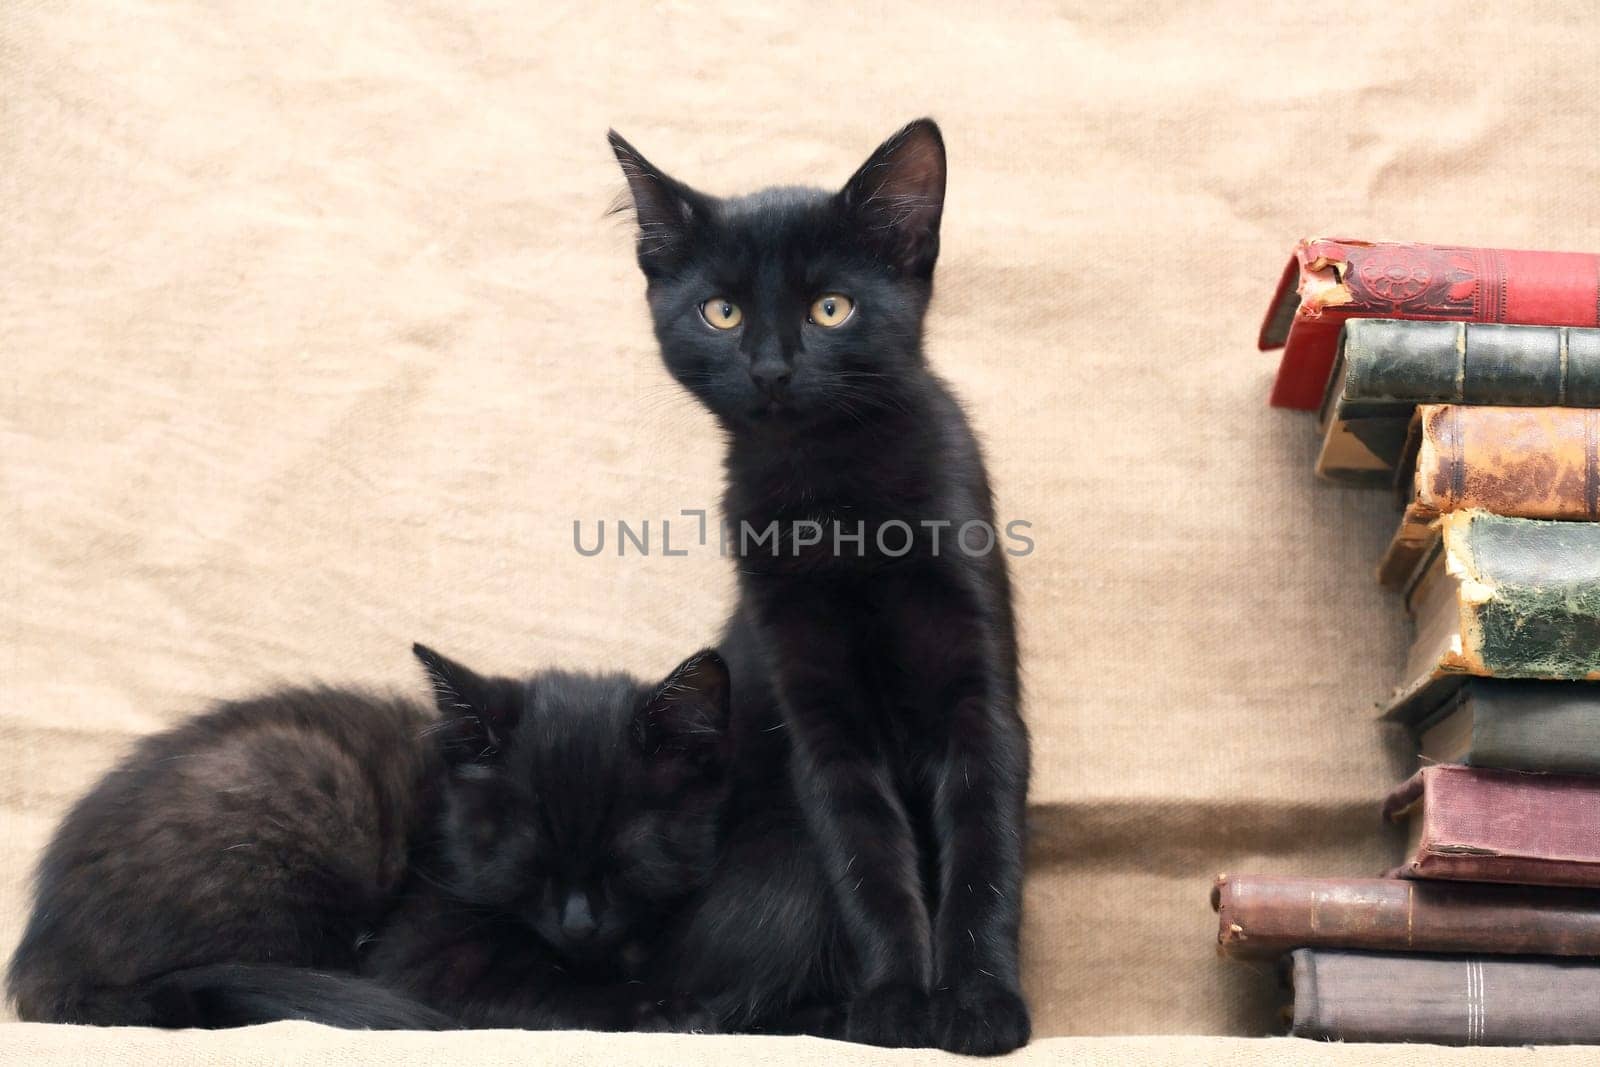 A pair of small black kittens near old books on canvas background